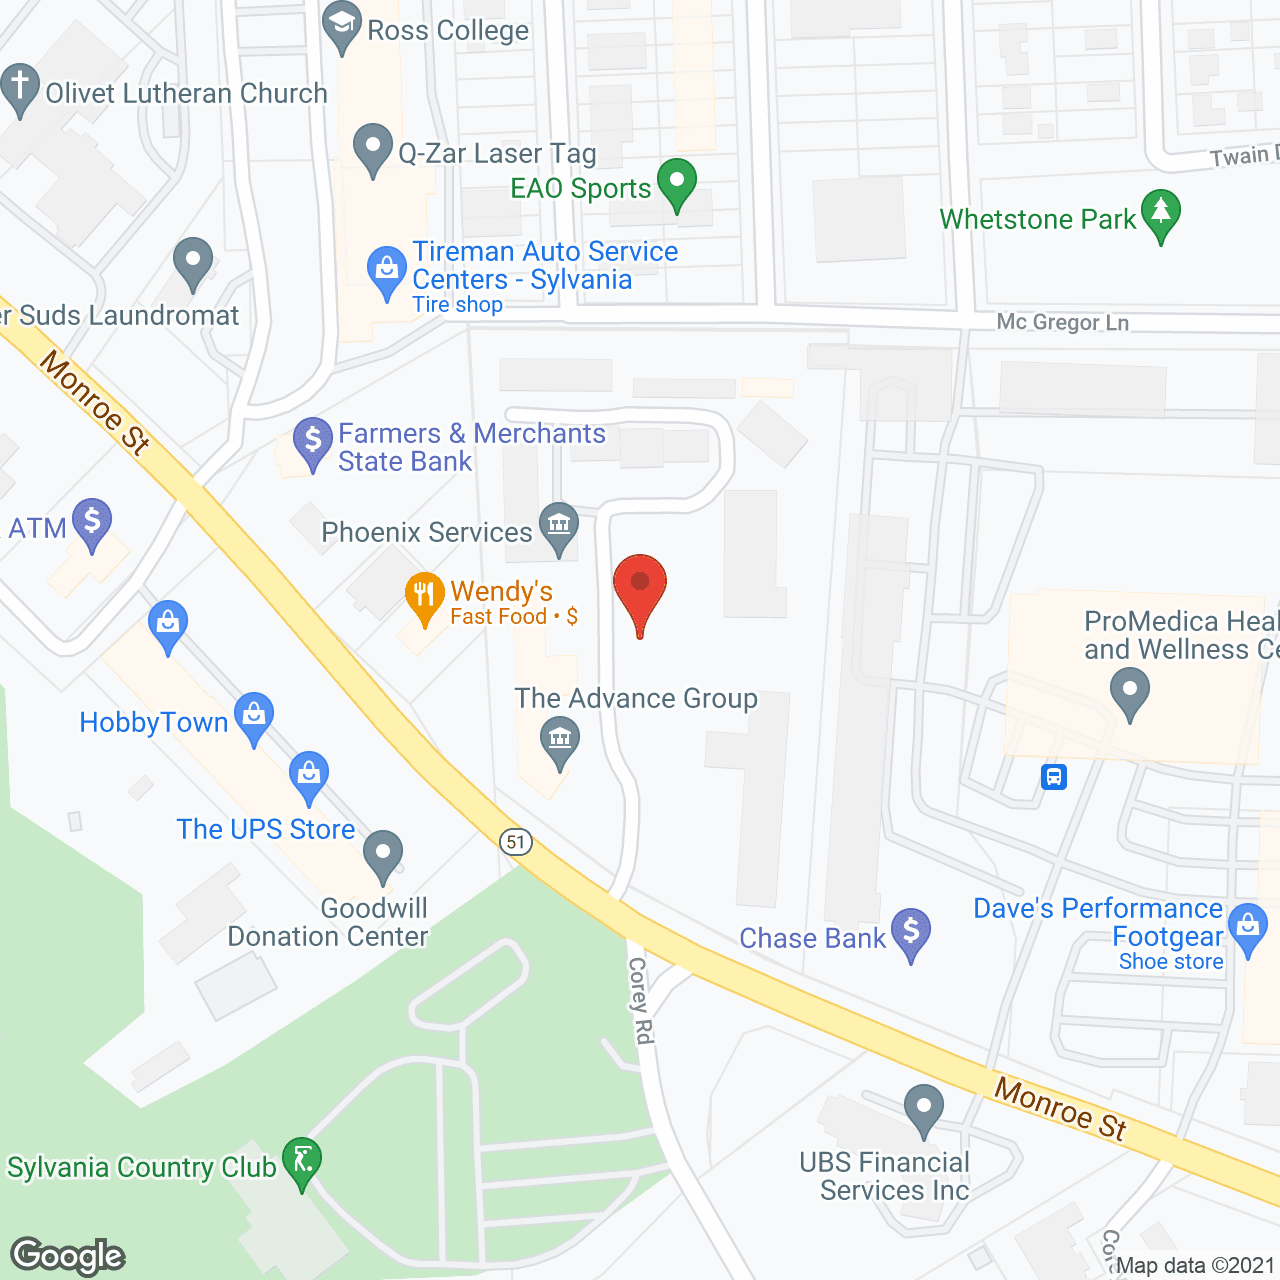 As Needed Healthcare Inc in google map